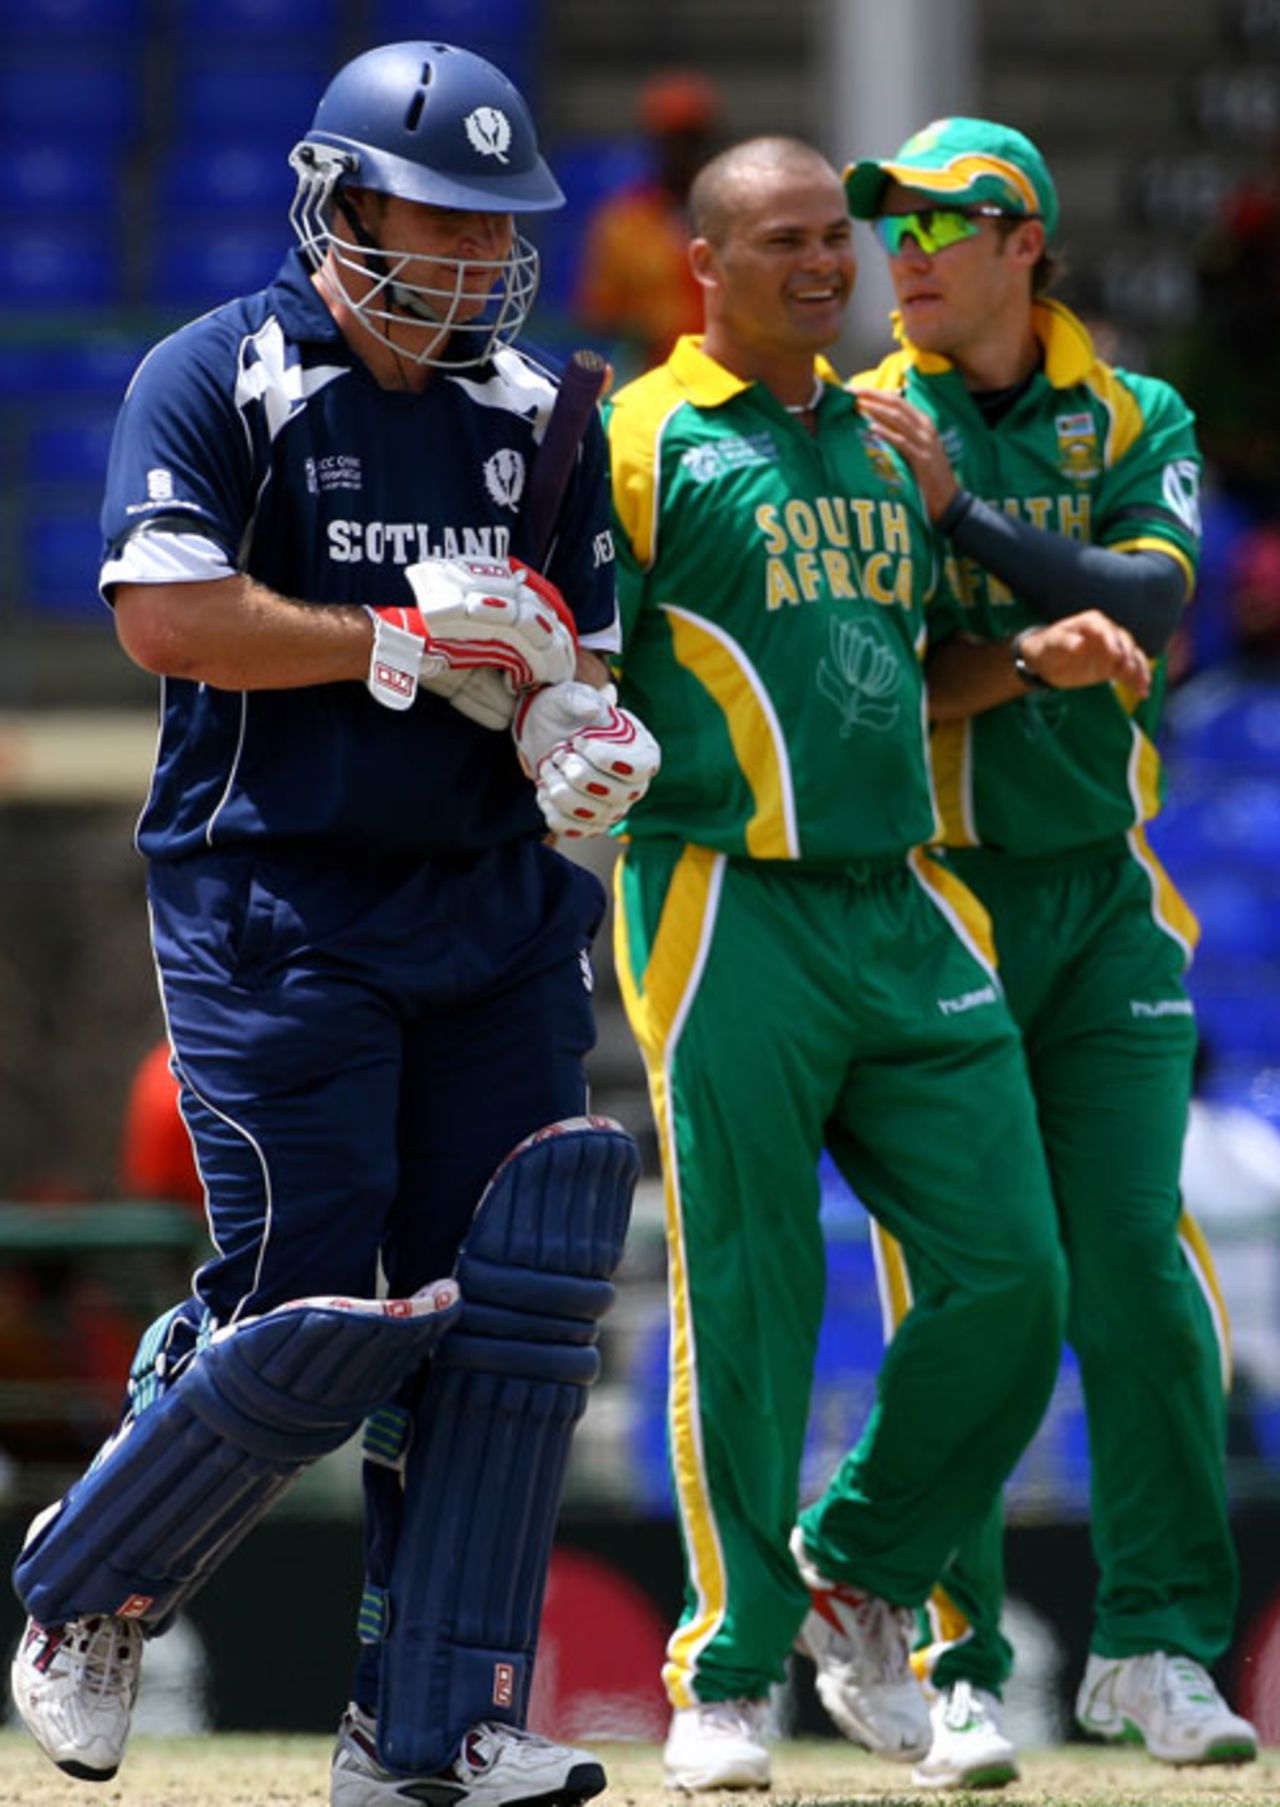 South Africa celebrate as Neil McCallum heads back to the pavilion after being bowled, Scotland v South Africa, Group A, St Kitts, March 20, 2007